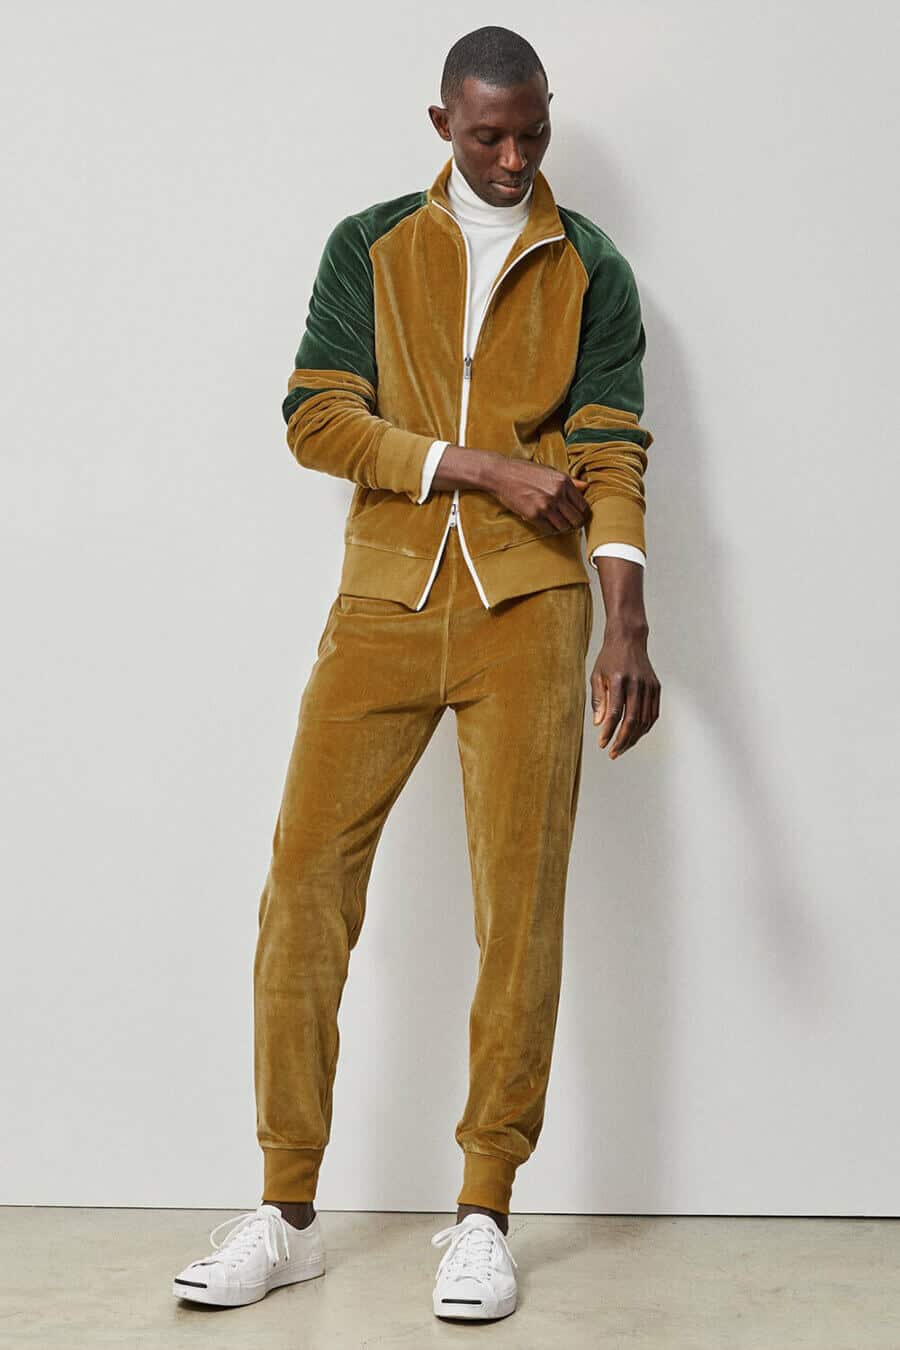 Men's turtleneck and tracksuit outfit